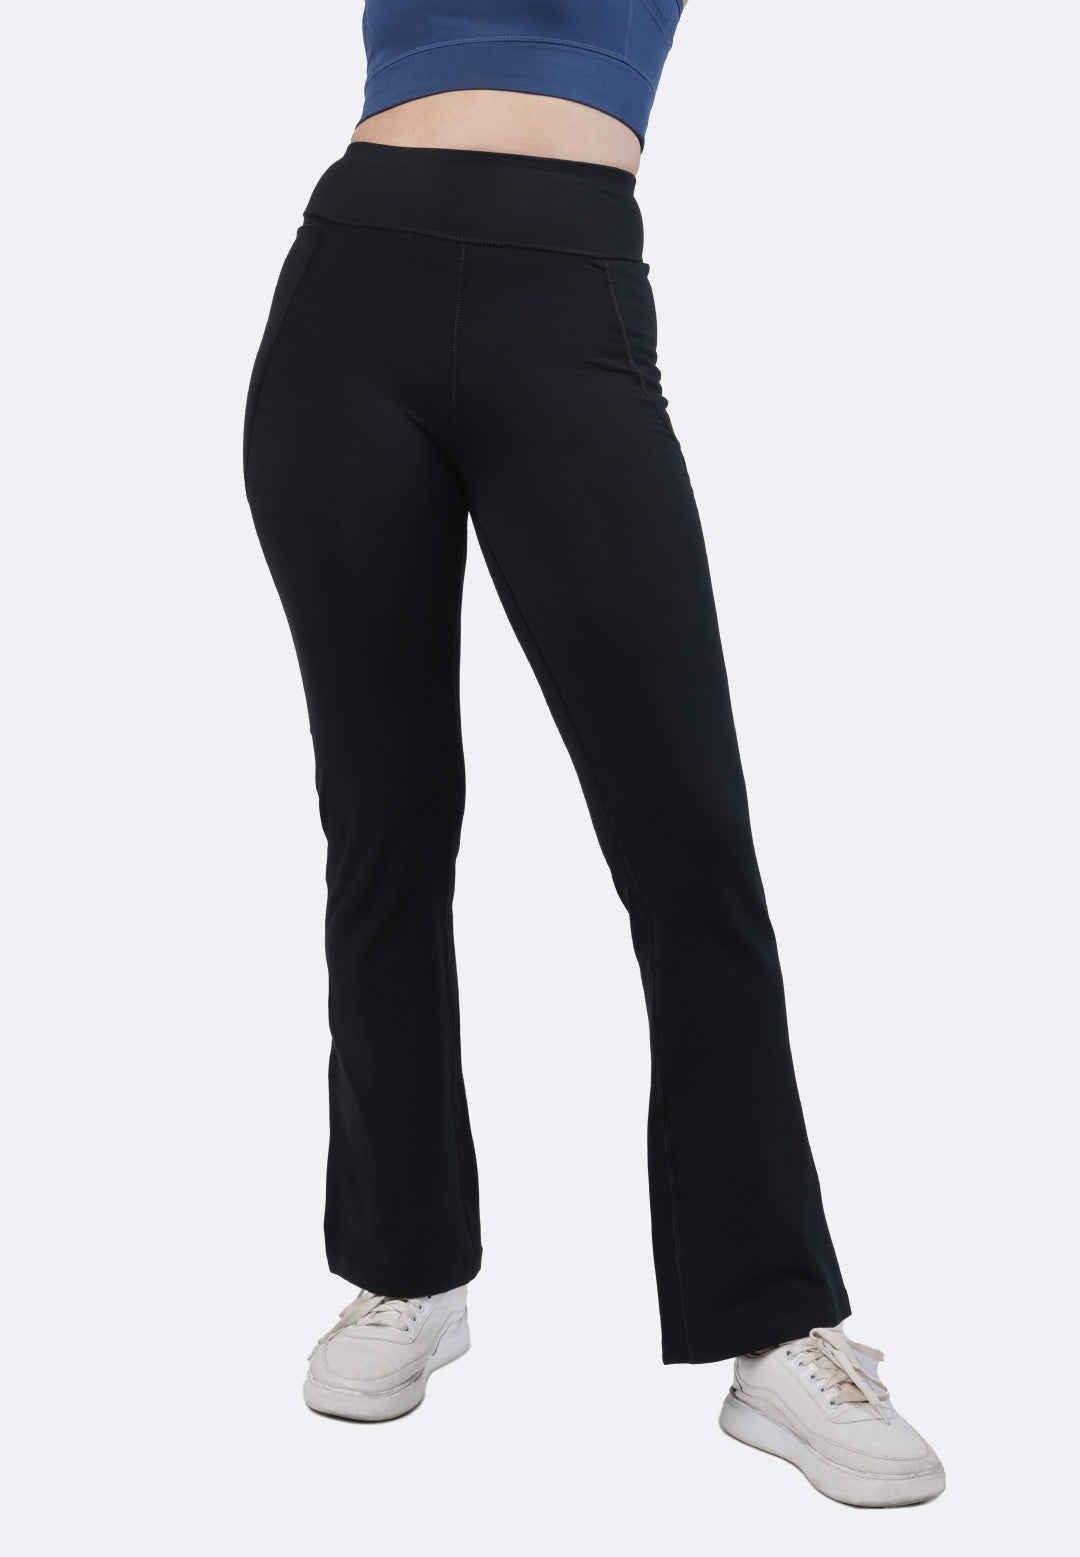 Croc Fit - Check out our Black Camo High Waisted Leggings... | Facebook